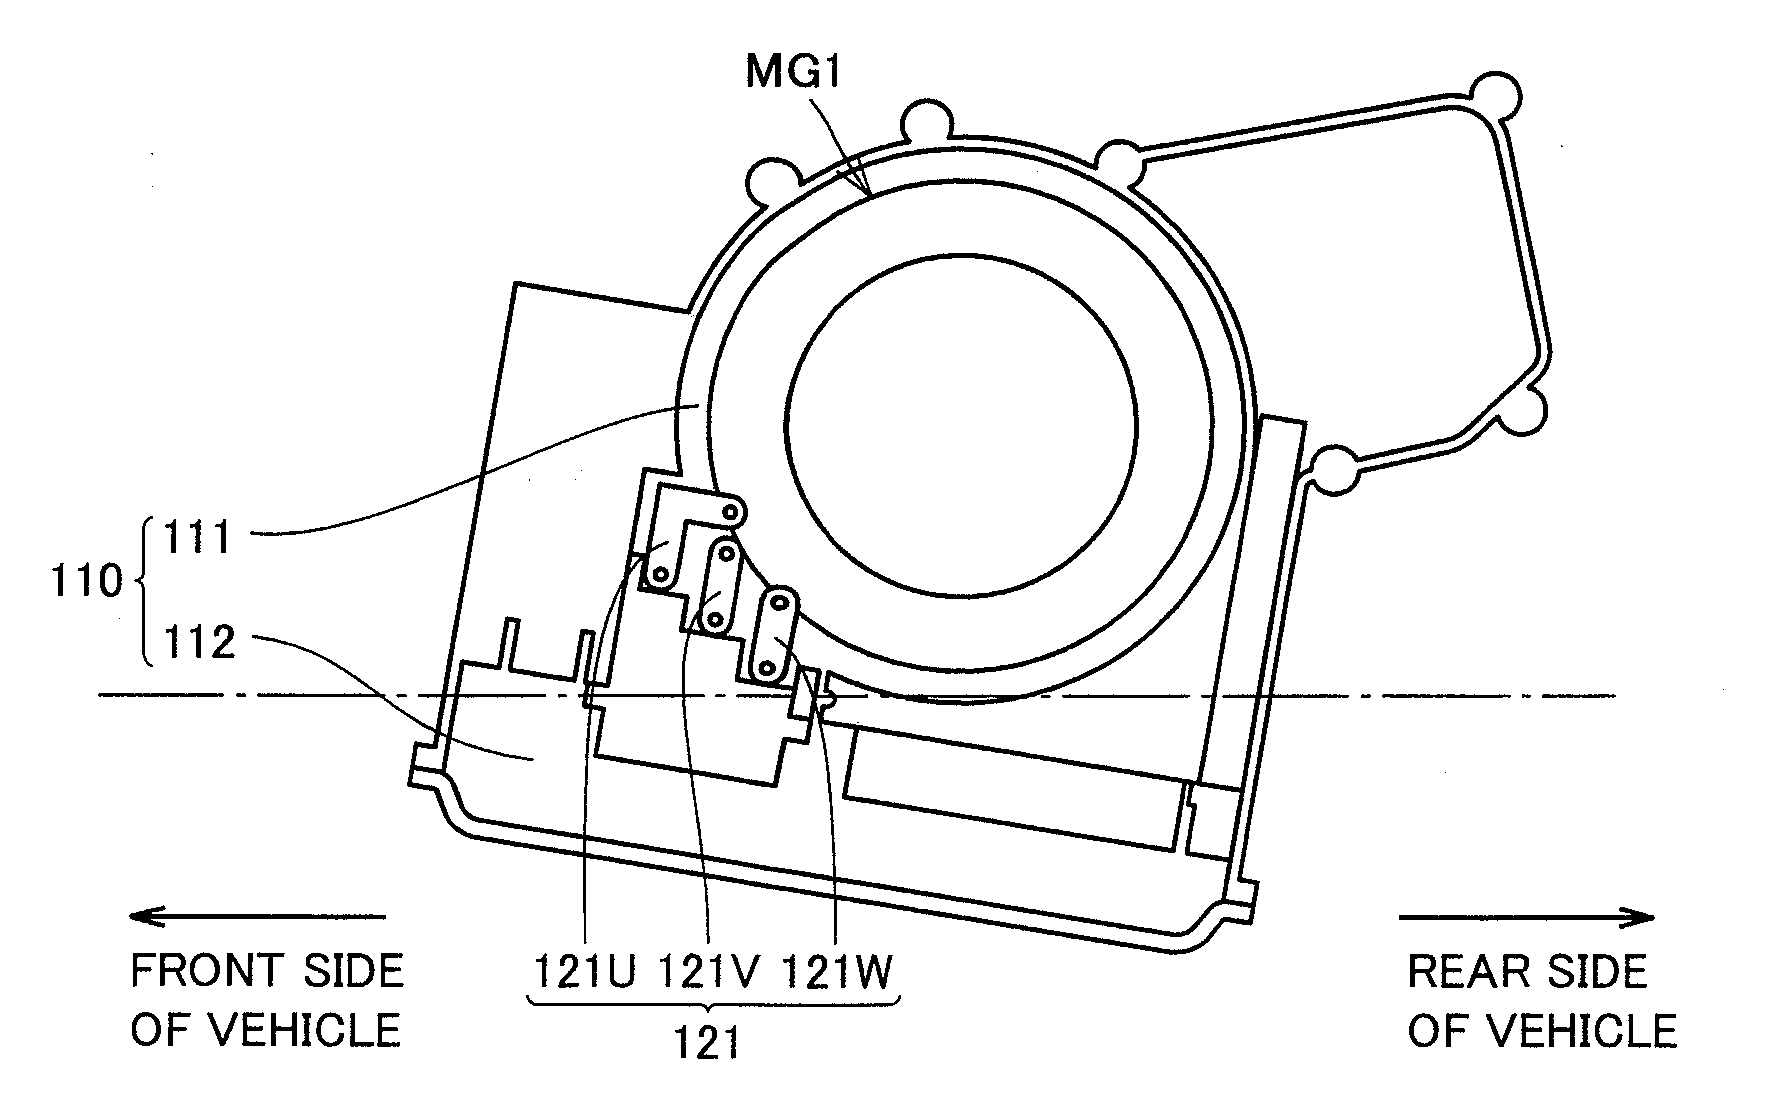 Structure for mounting vehicle driving apparatus